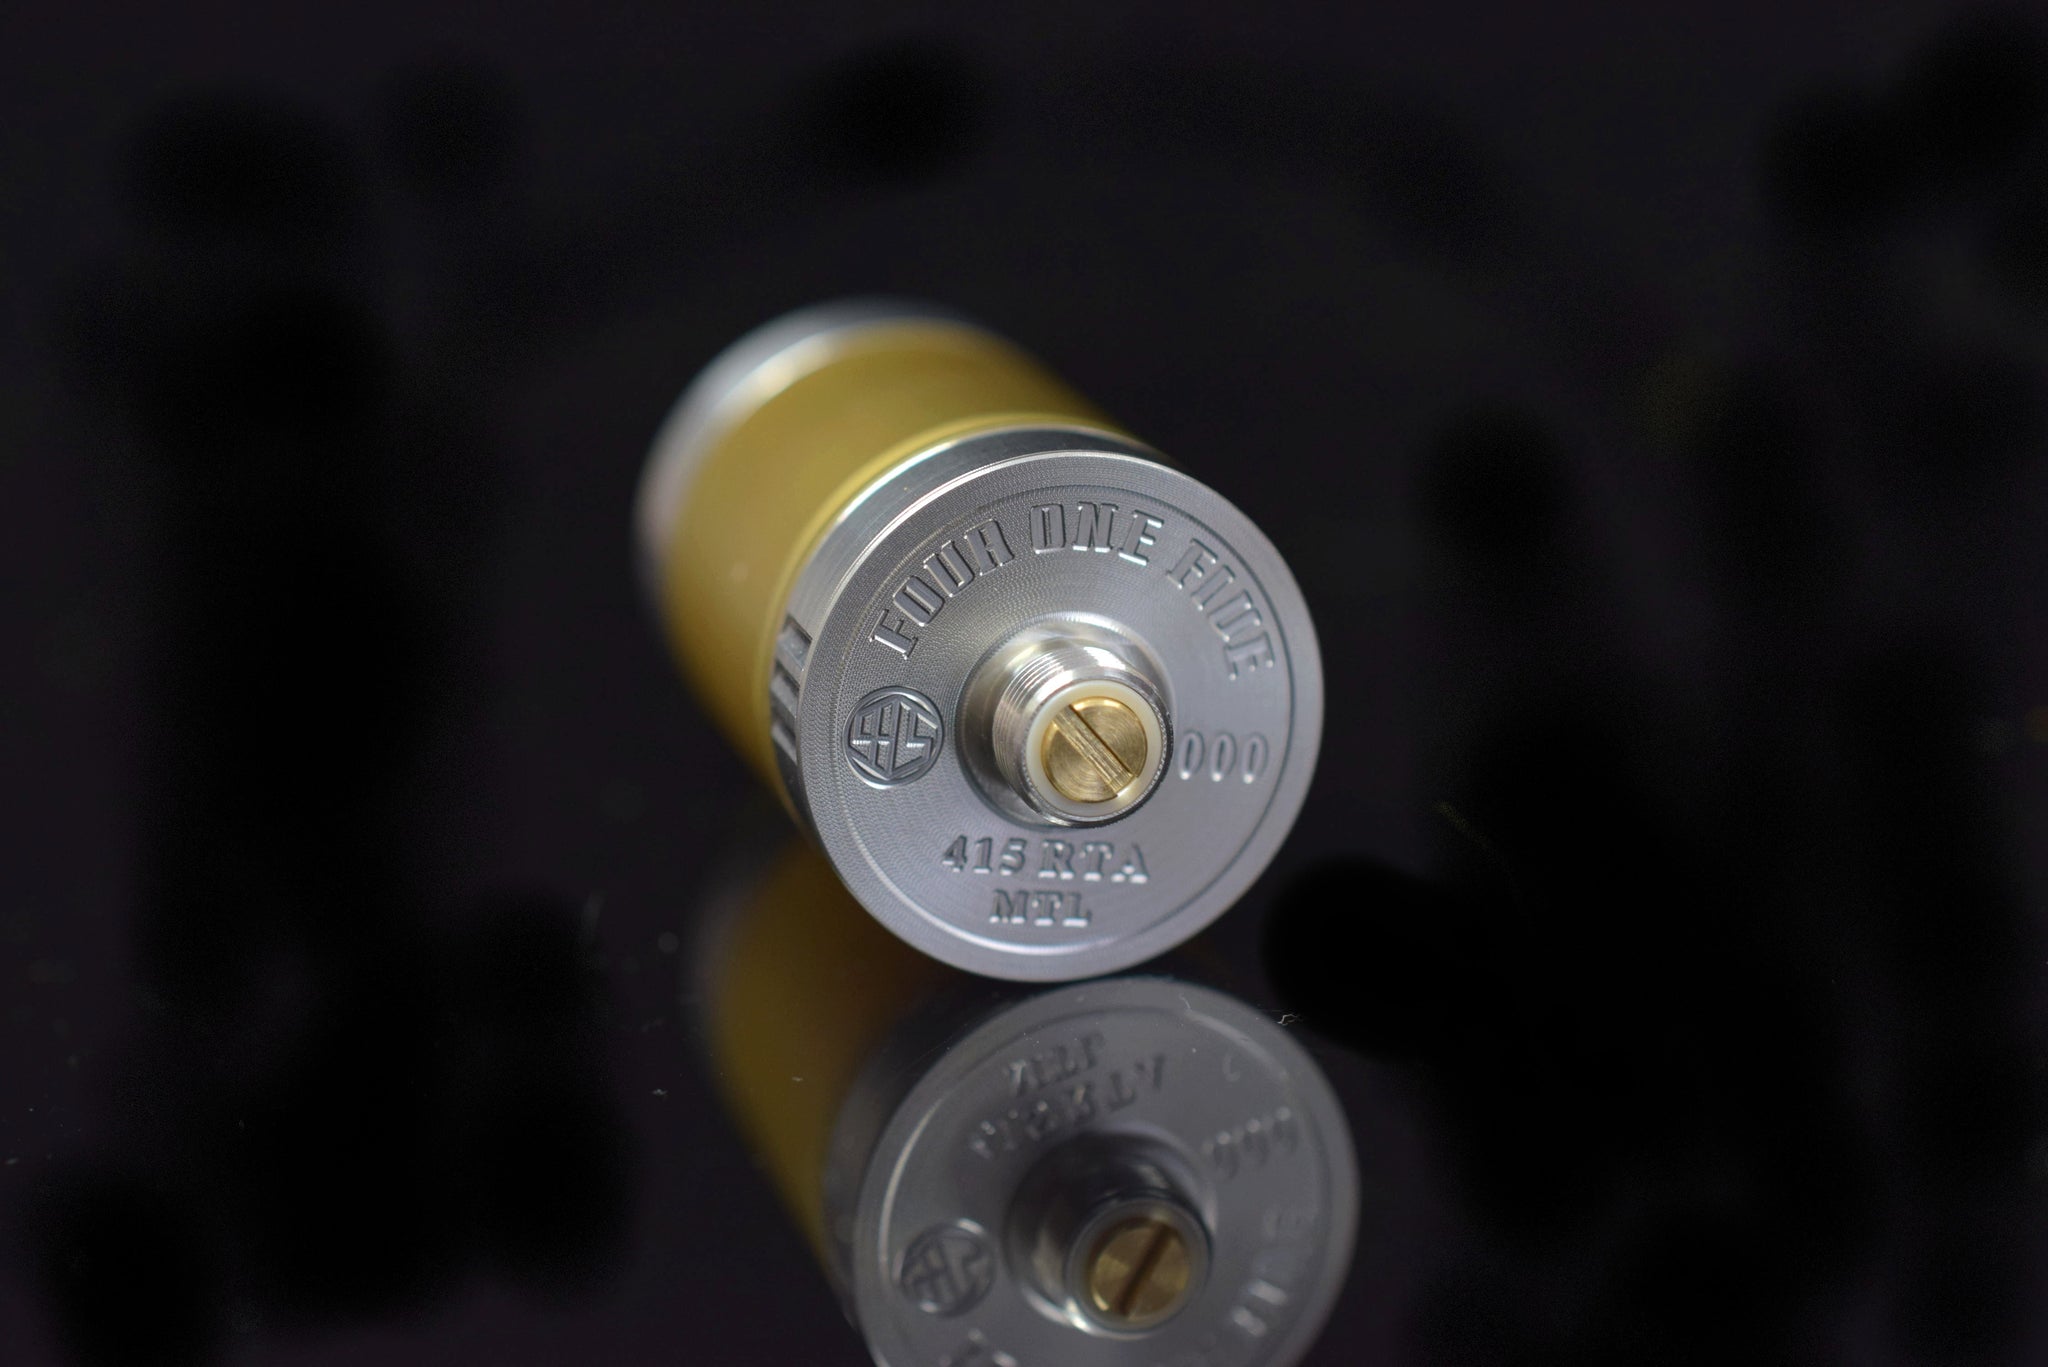 【NEW Air pin】FOUR ONE FIVE 415RTA MTL